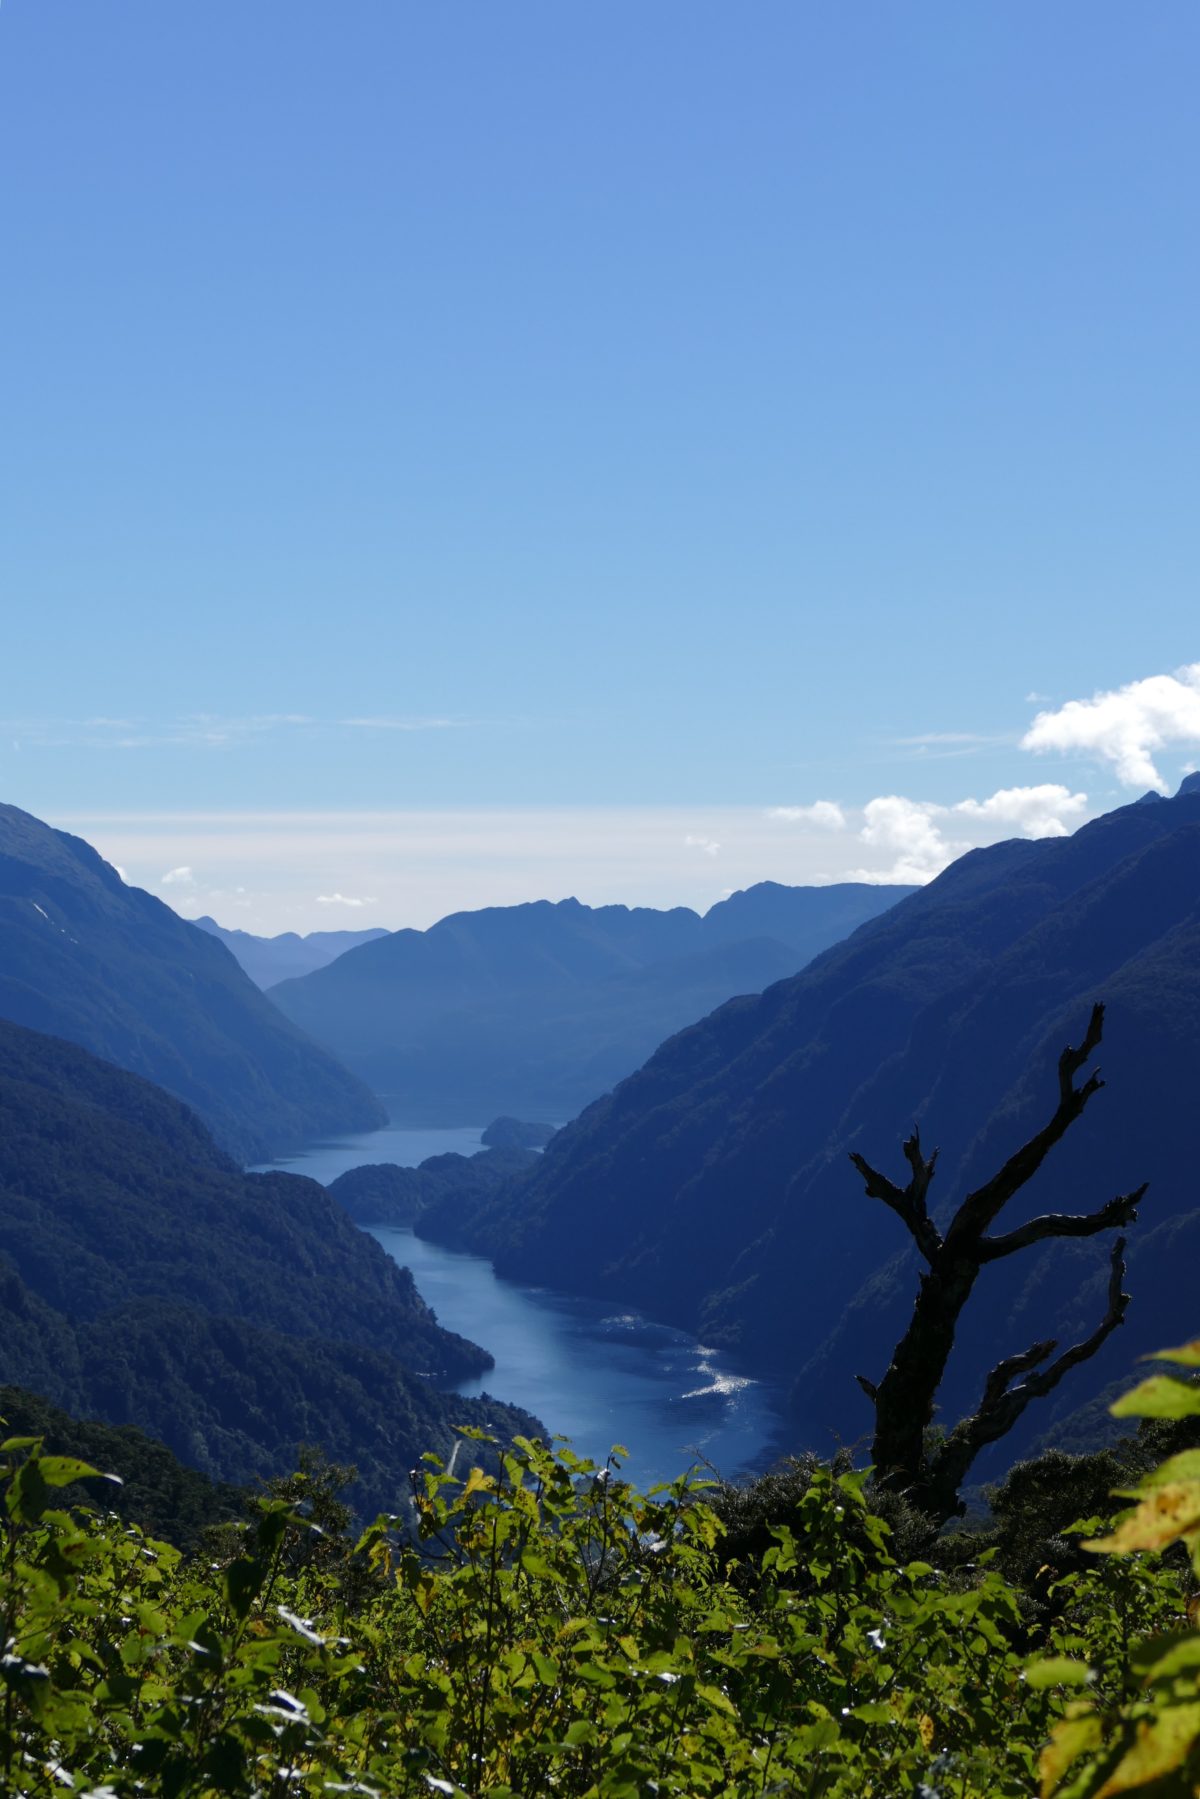 View into (just part of) Doubtful Sound from top of Wilmot Pass. All photos copyright Doug Spencer.